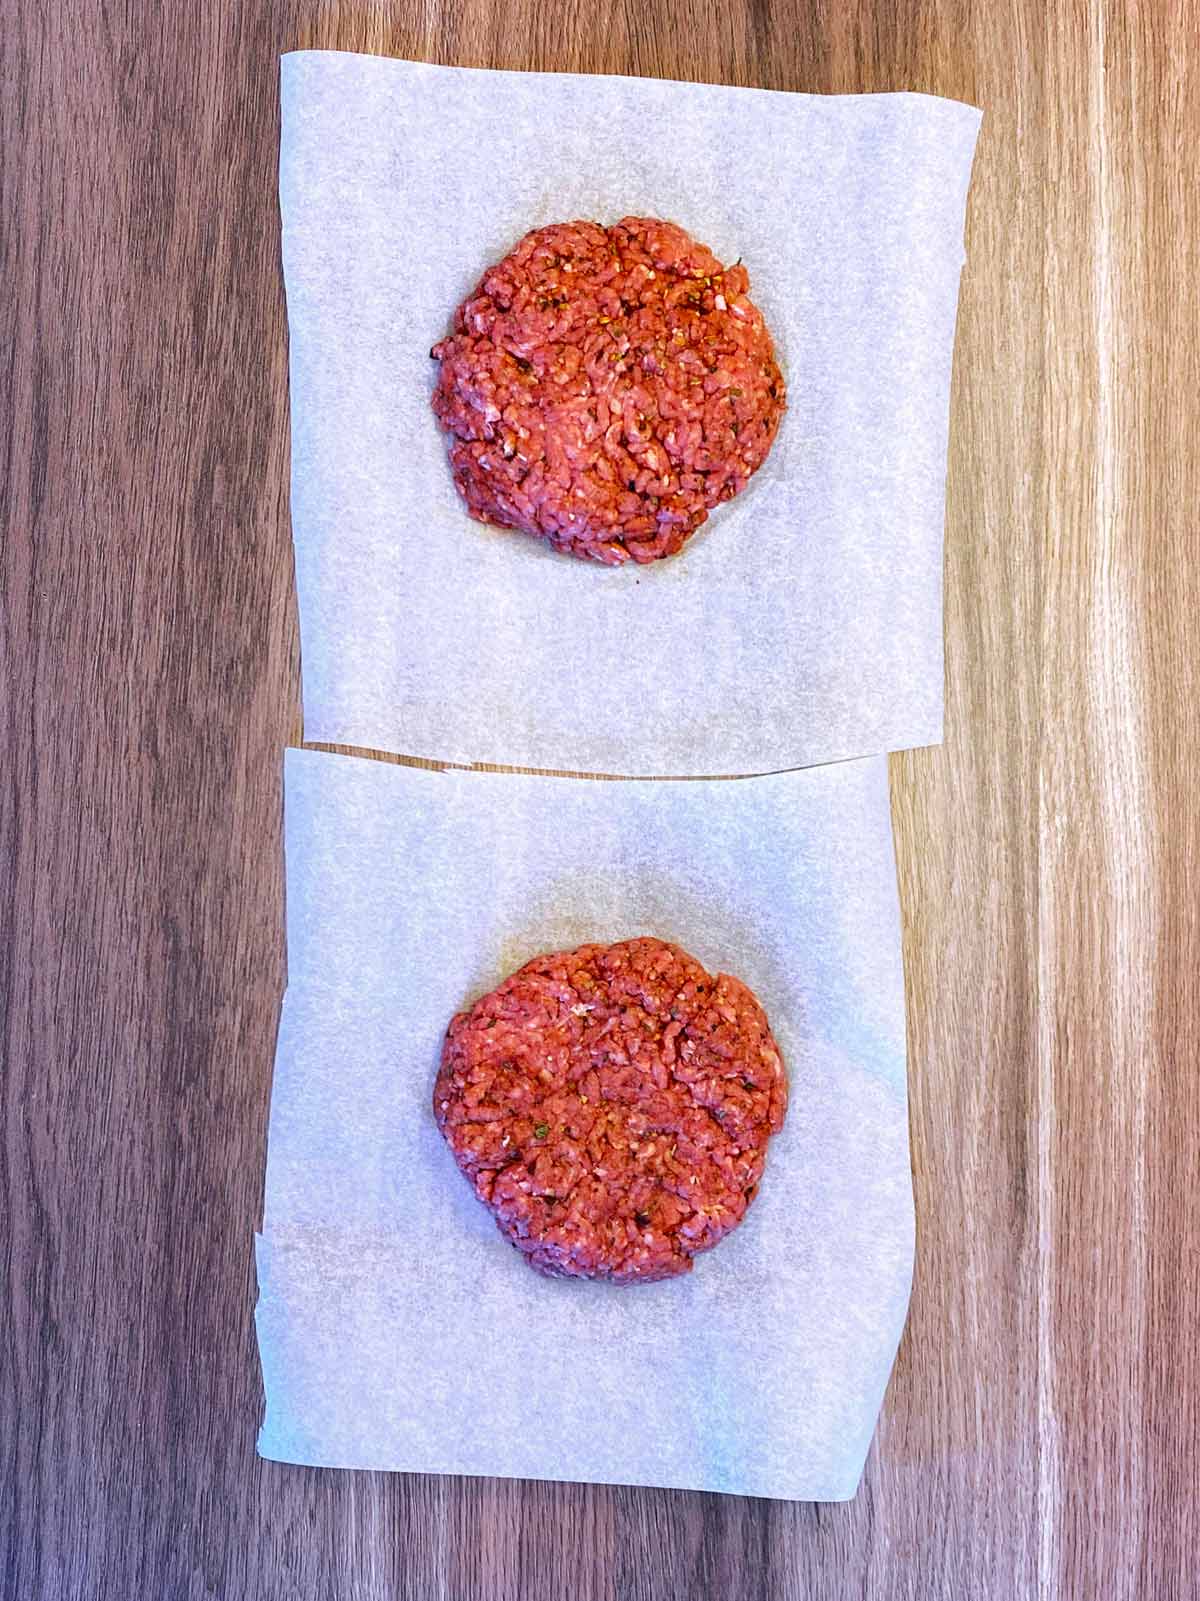 Two raw burger patties on parchment paper.